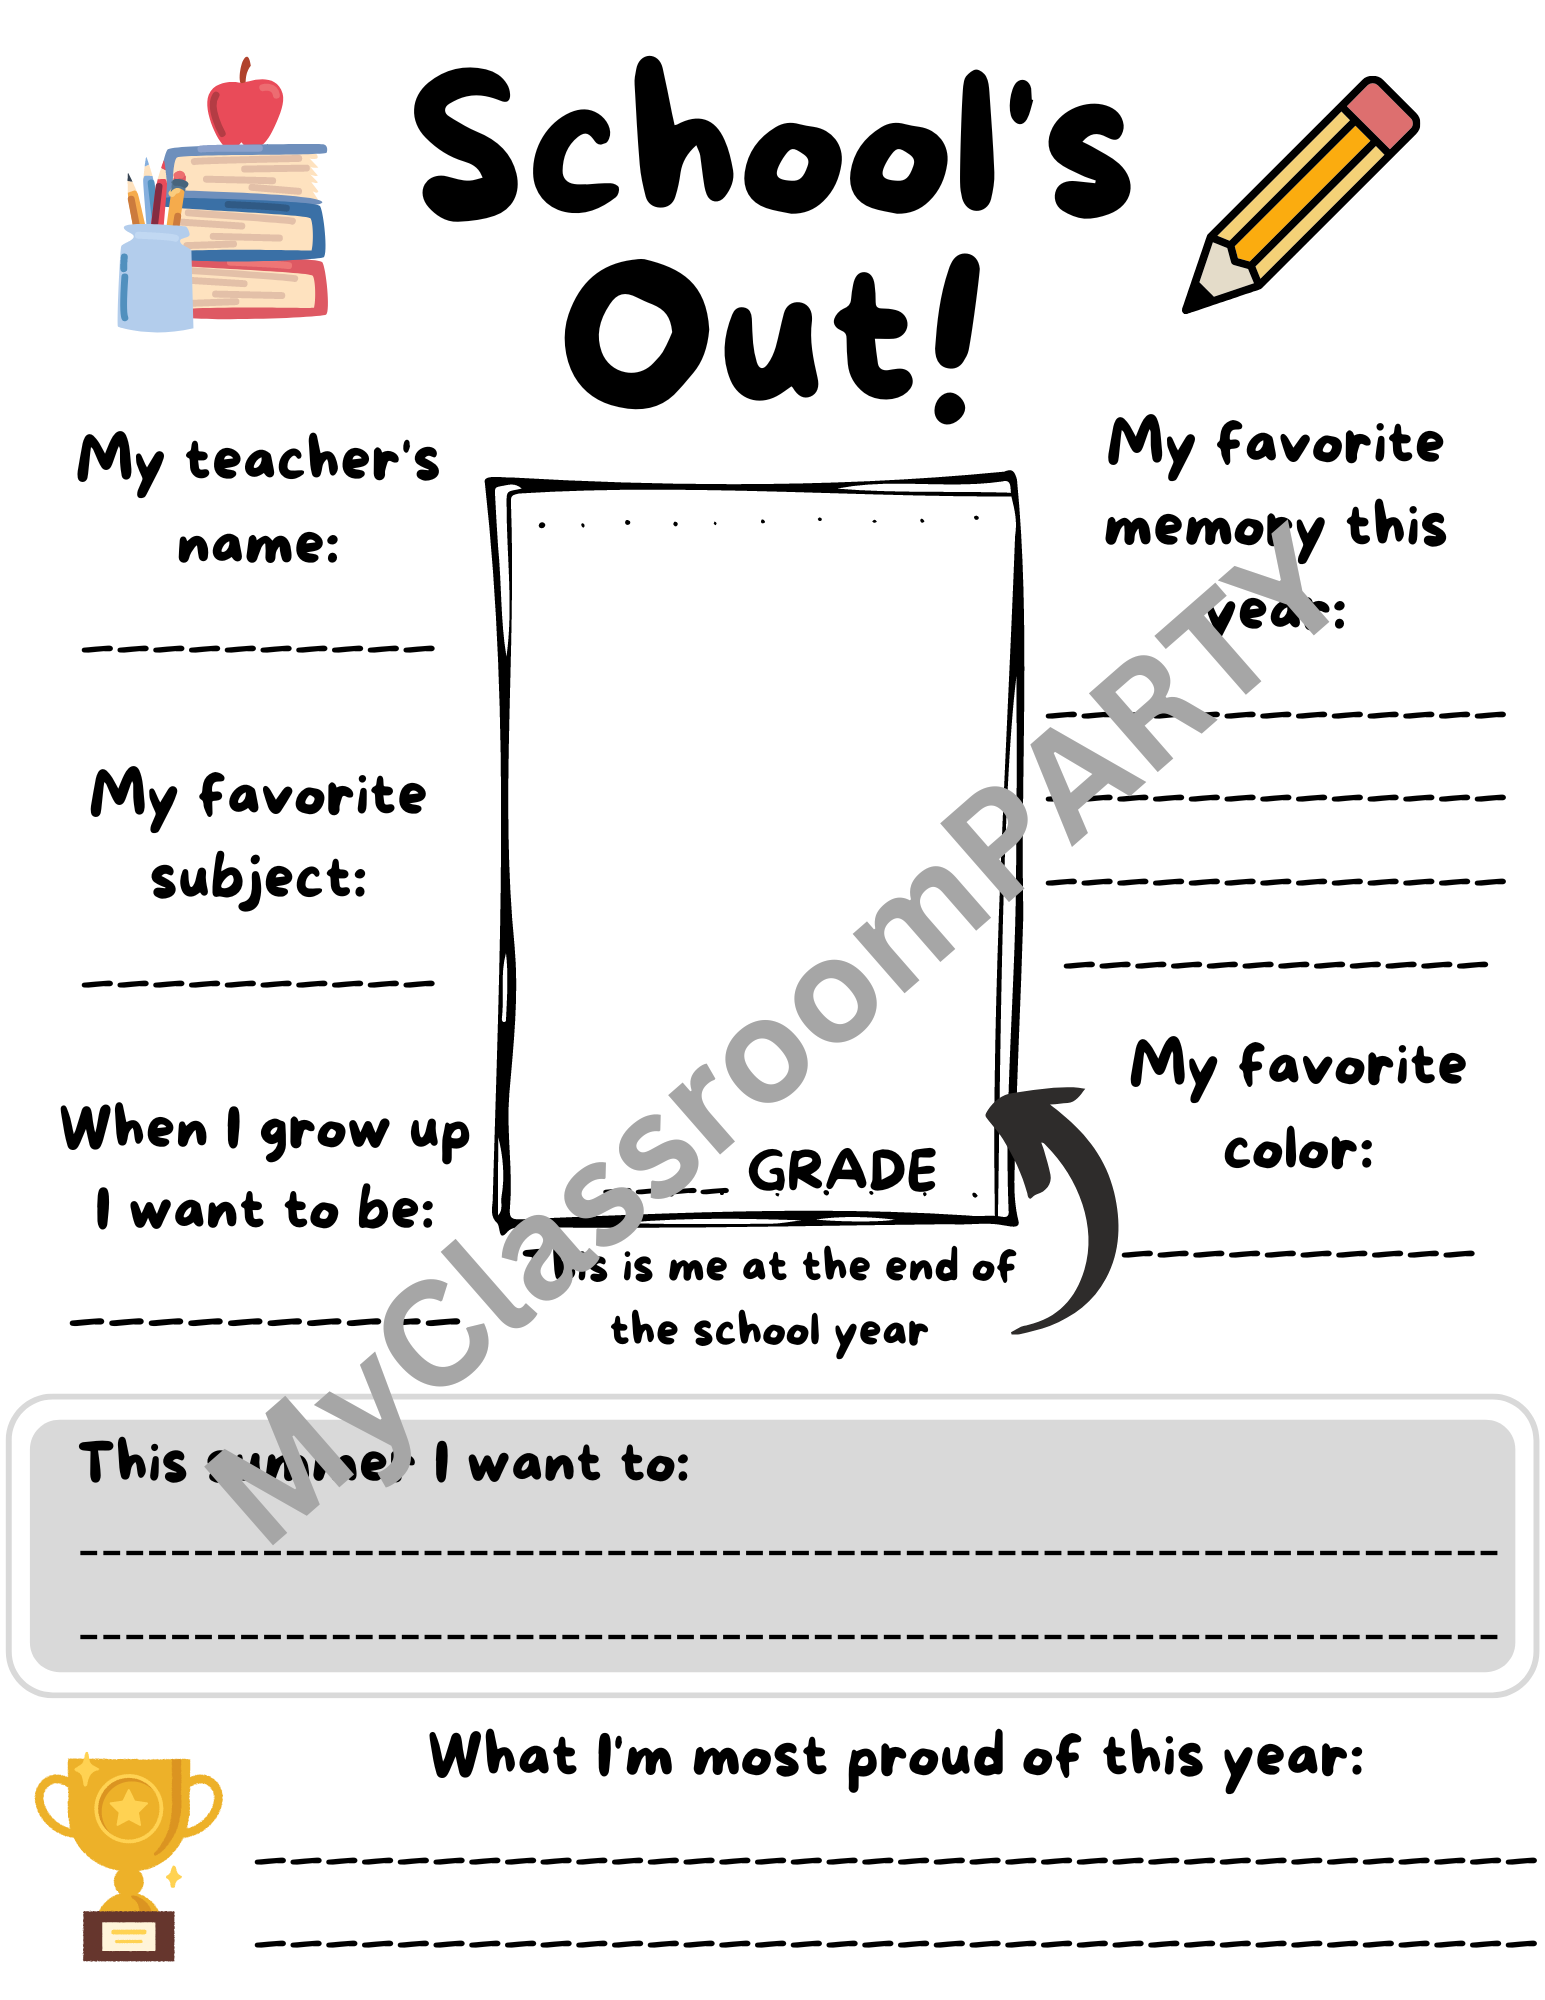 Print out students can fill out about their school year to remember it